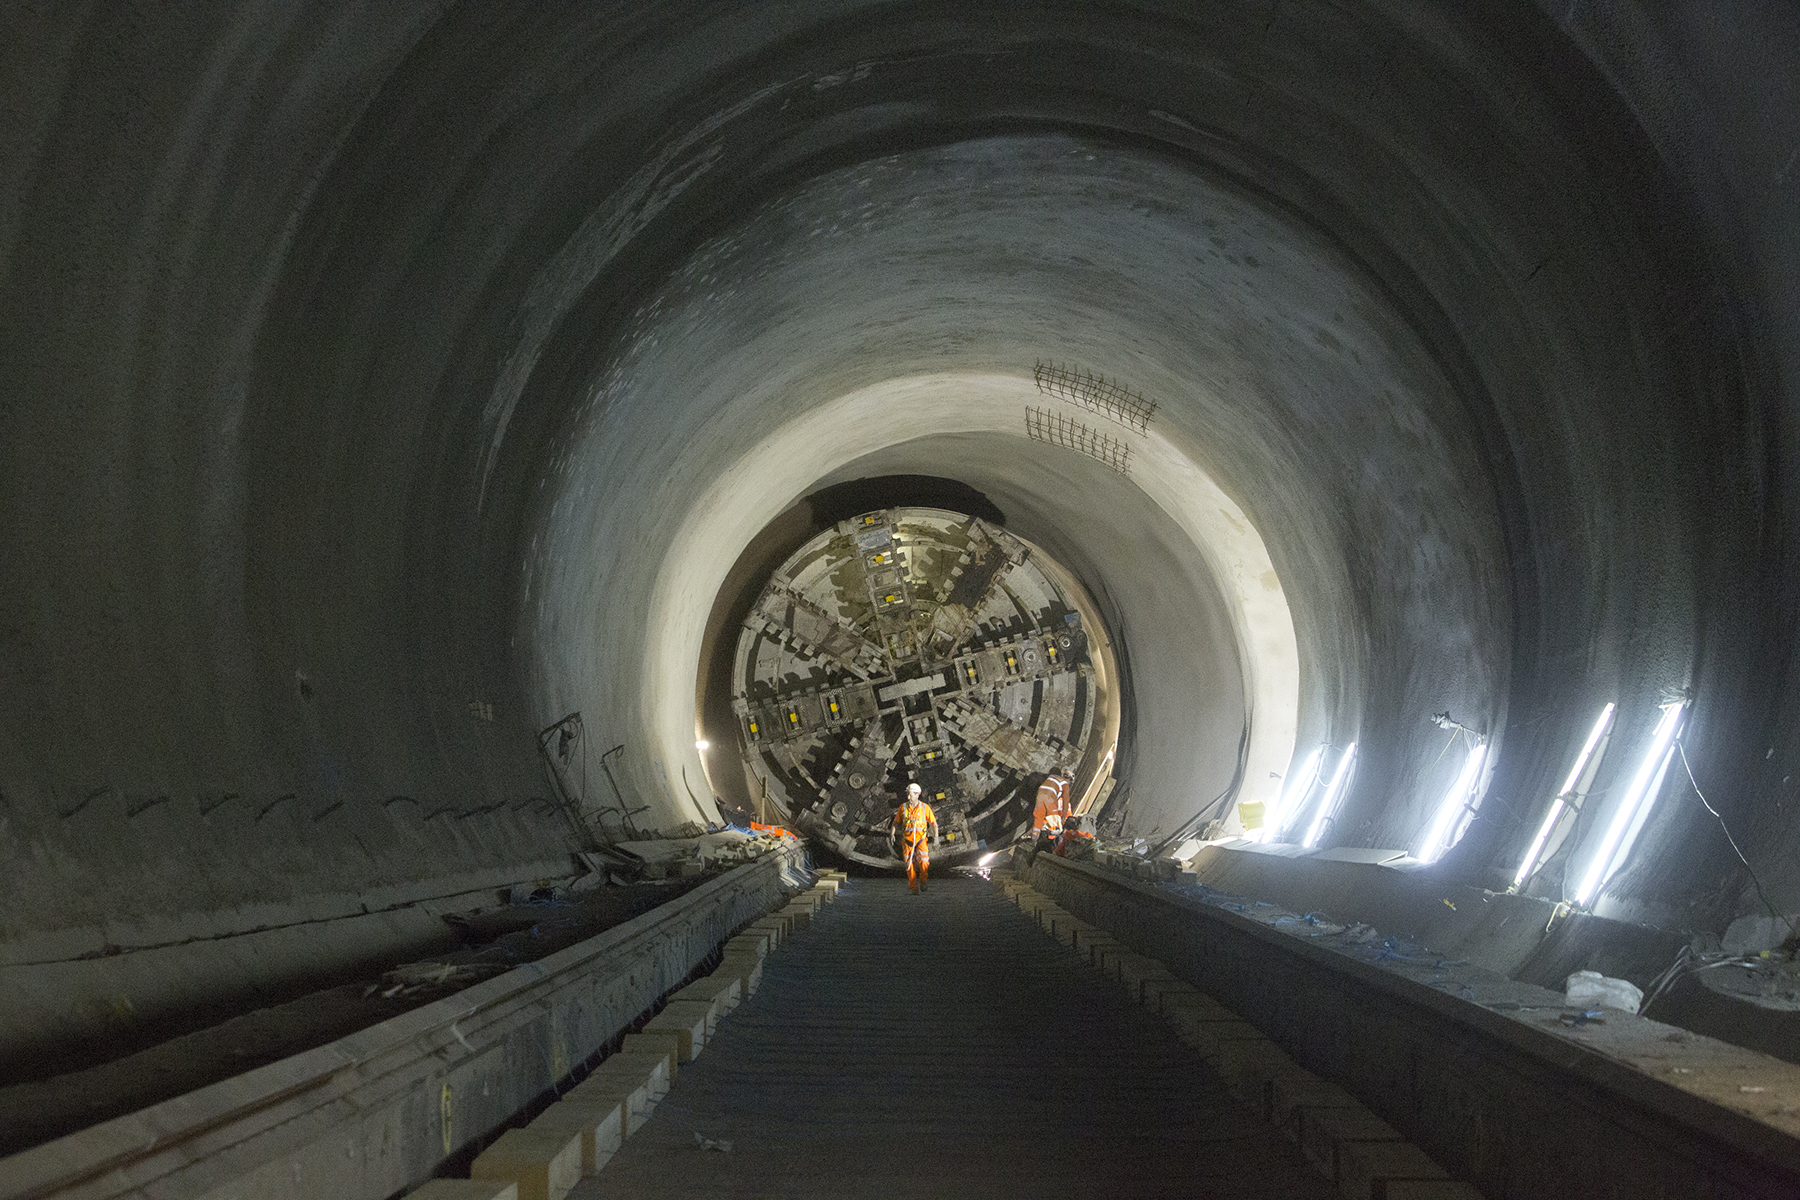 Crossrail required 42 km of tunneling 15-30 m deep underneath London — as demonstrated by this tunneling machine digging under Whitechapel. (Image courtesy of Transport for London)